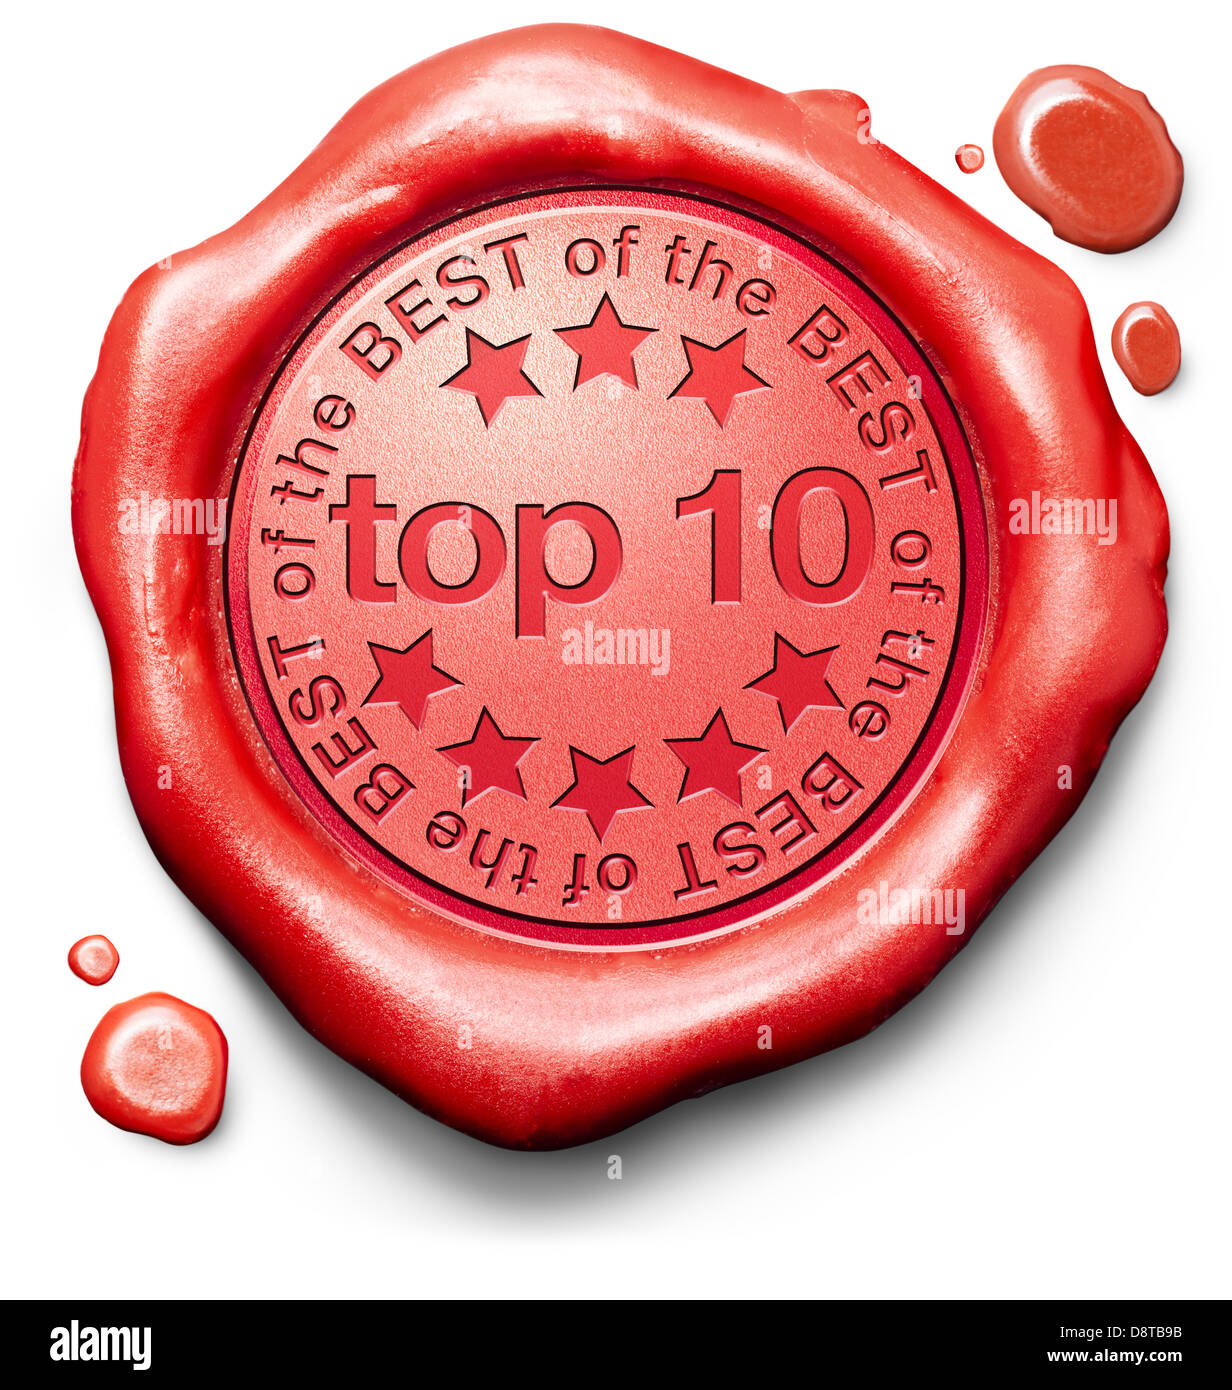 top 10 best bestseller quality label red wax seal stamp or badge Stock Photo